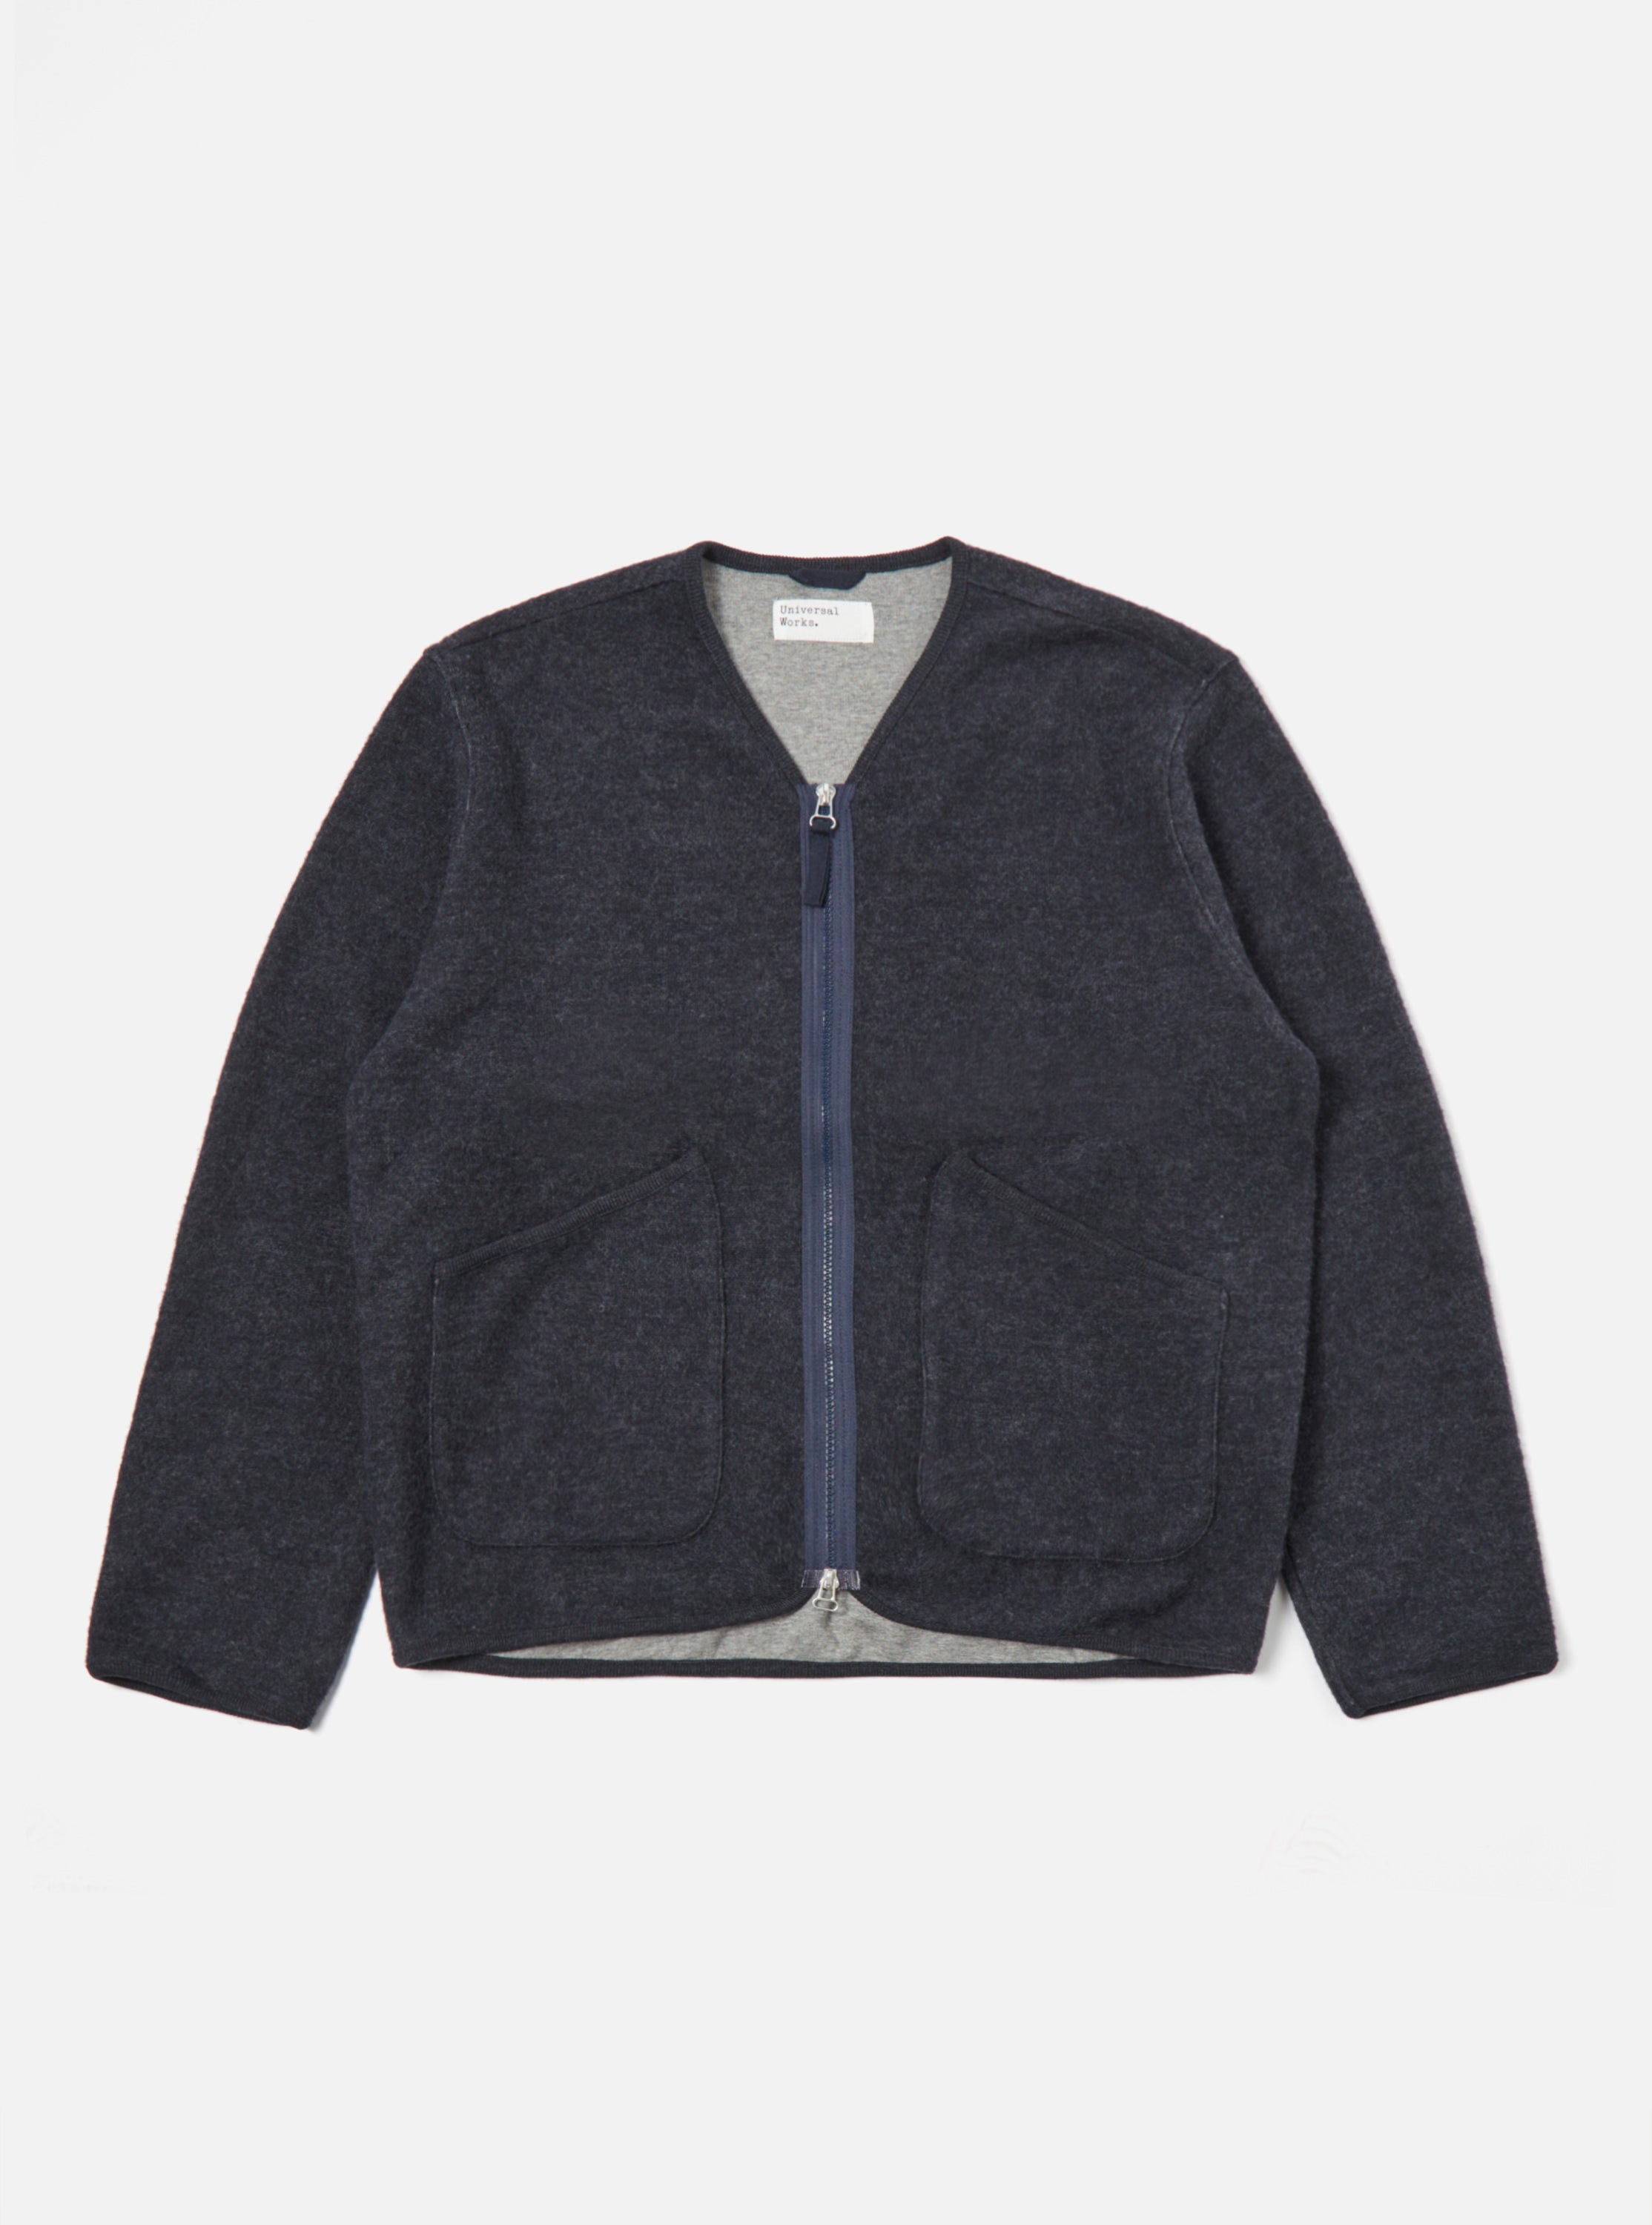 Universal Works Zip Liner Jacket in Blue Soft Wool Cotton Knit